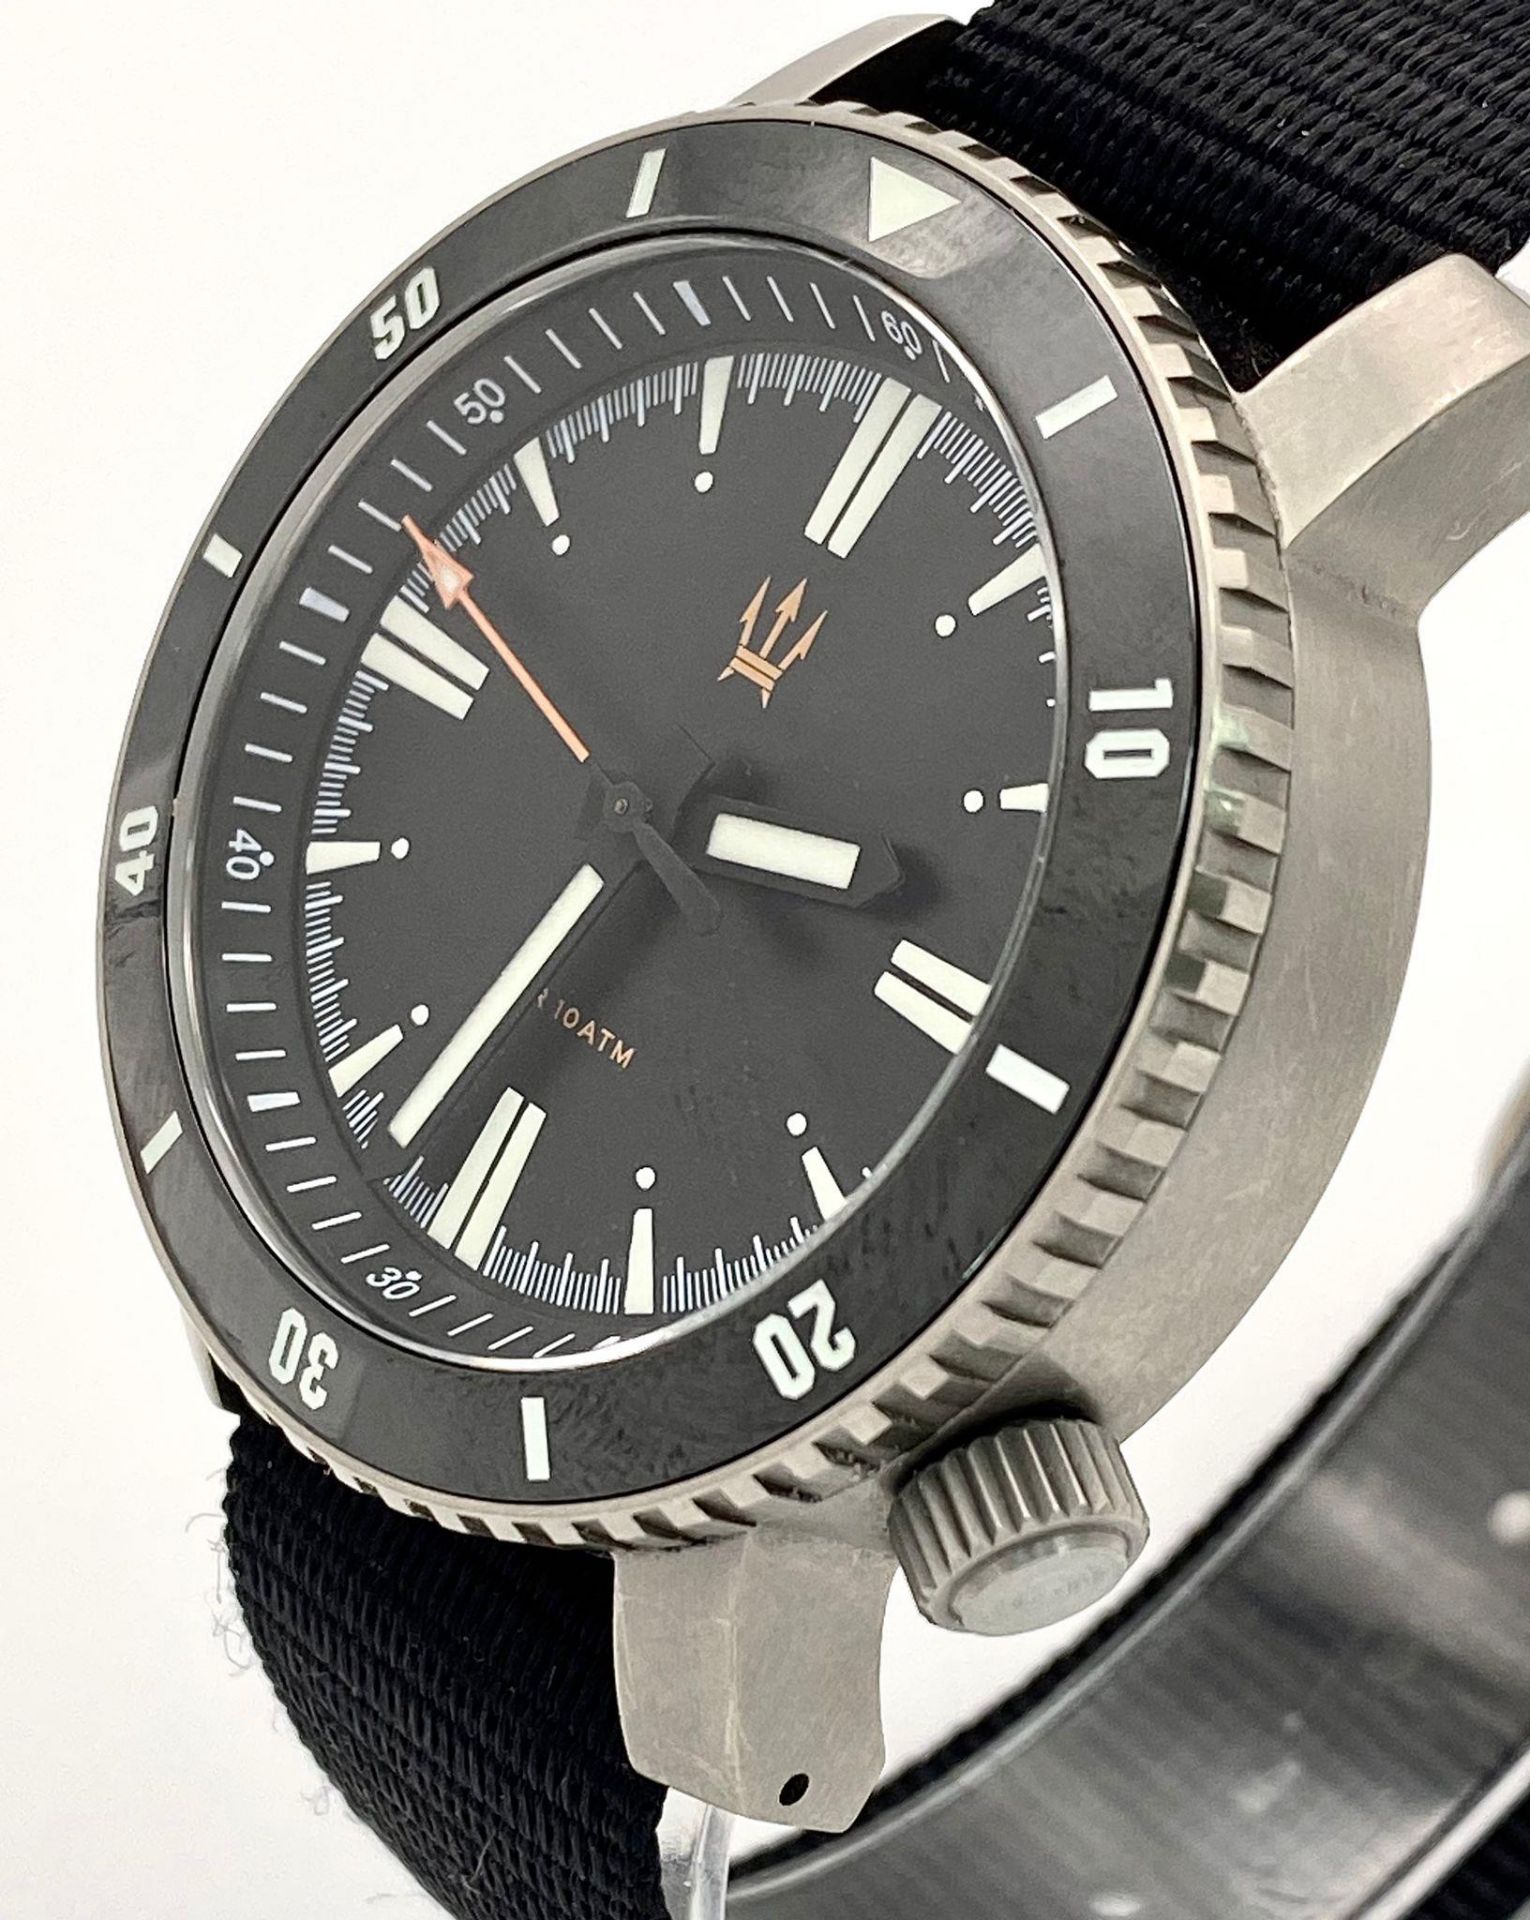 An Excellent Condition, Limited Edition, Military Specification, Automatic Divers Watch by - Bild 4 aus 7